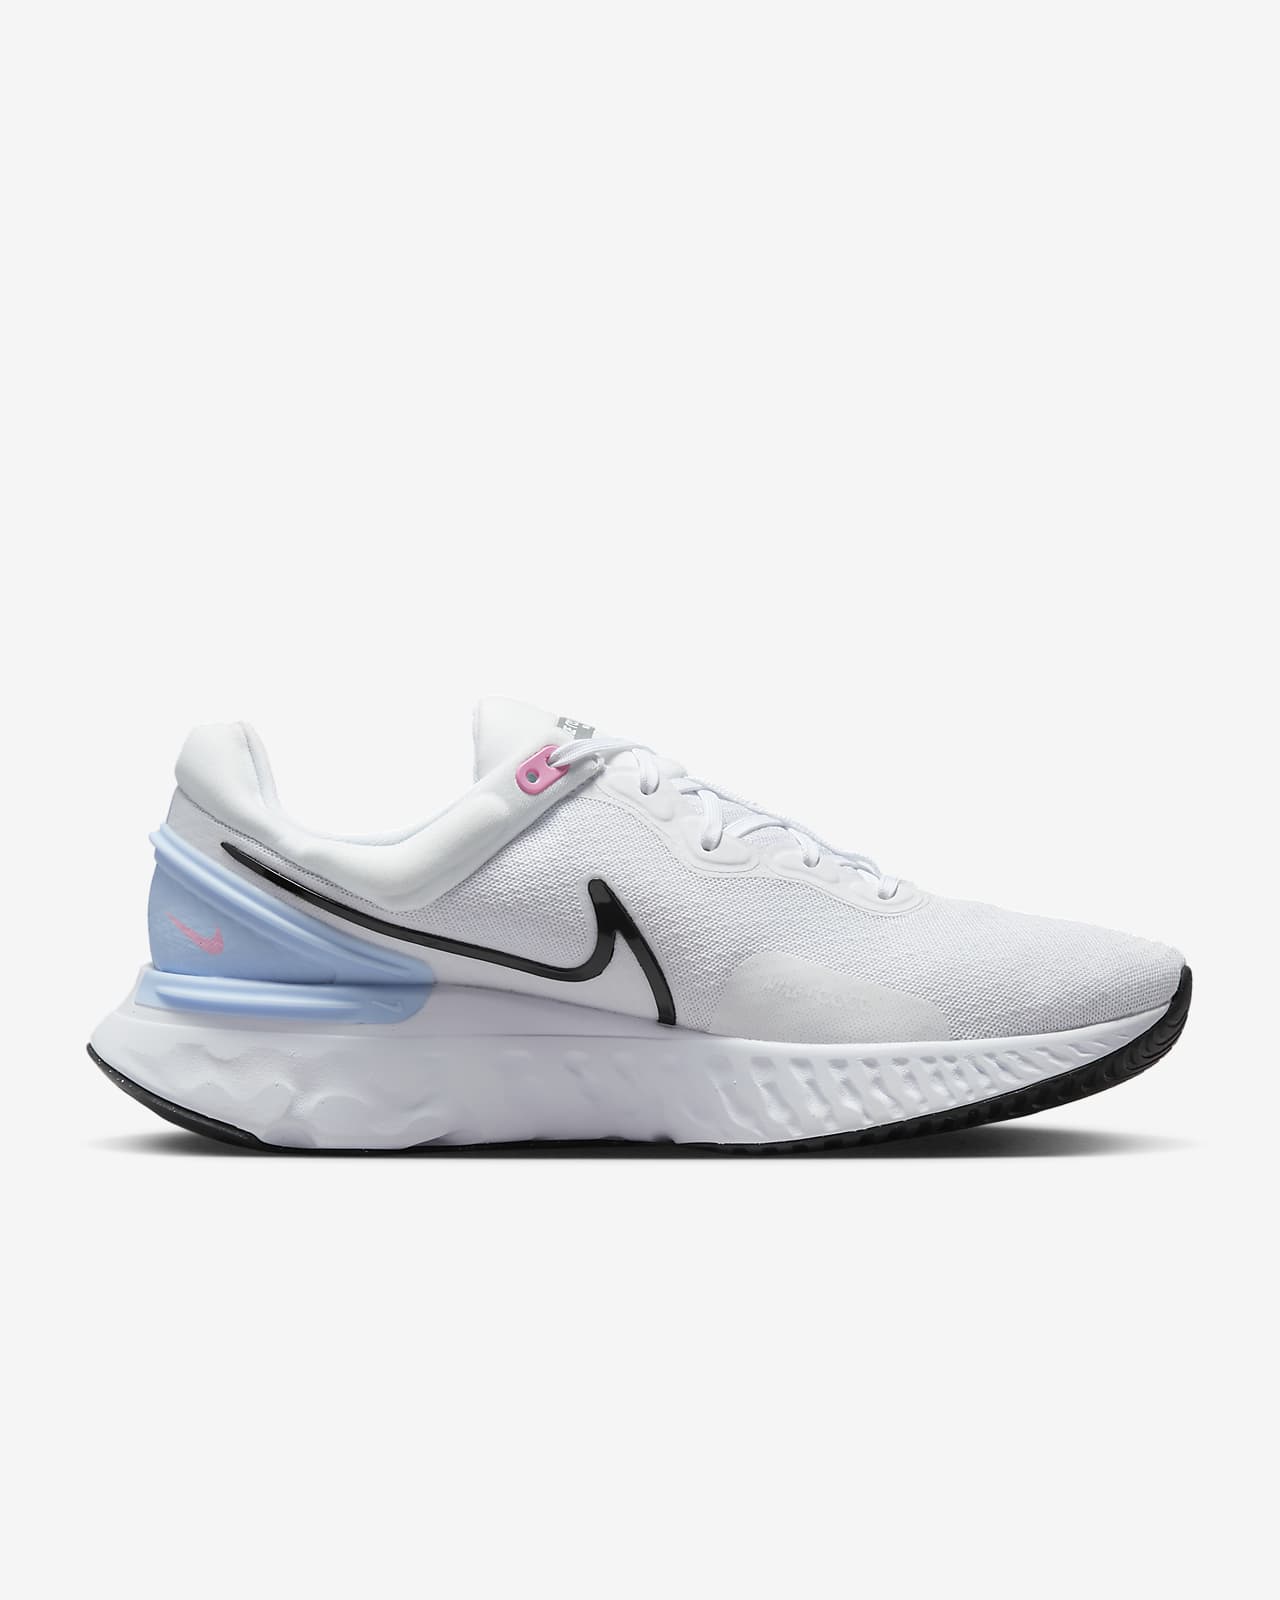 nike react shoes price in india